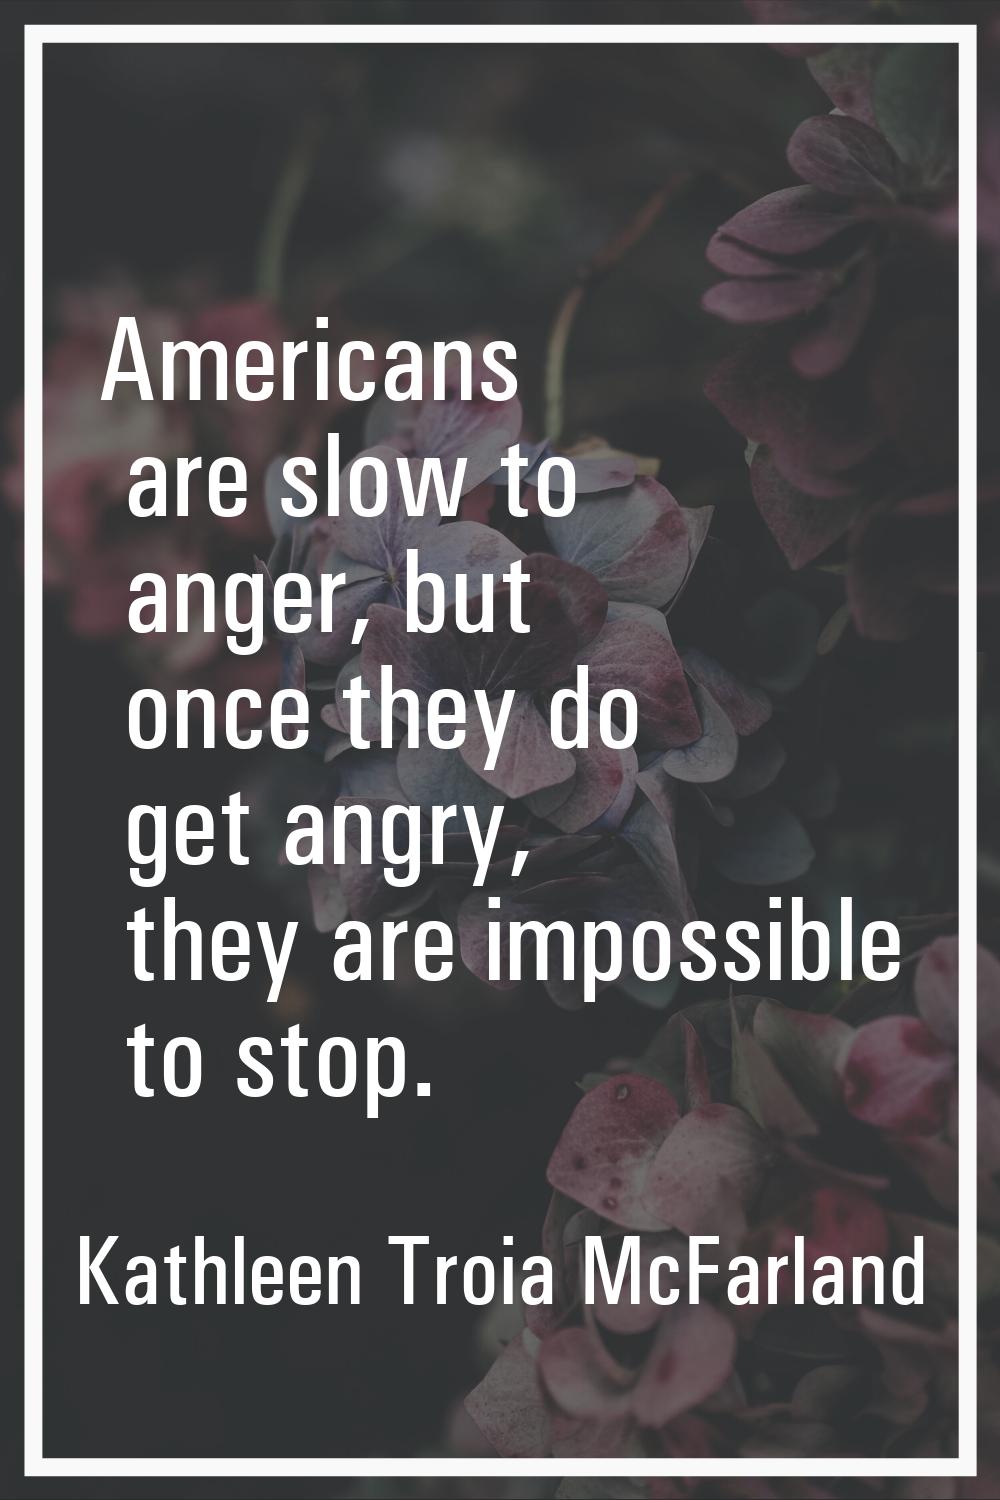 Americans are slow to anger, but once they do get angry, they are impossible to stop.